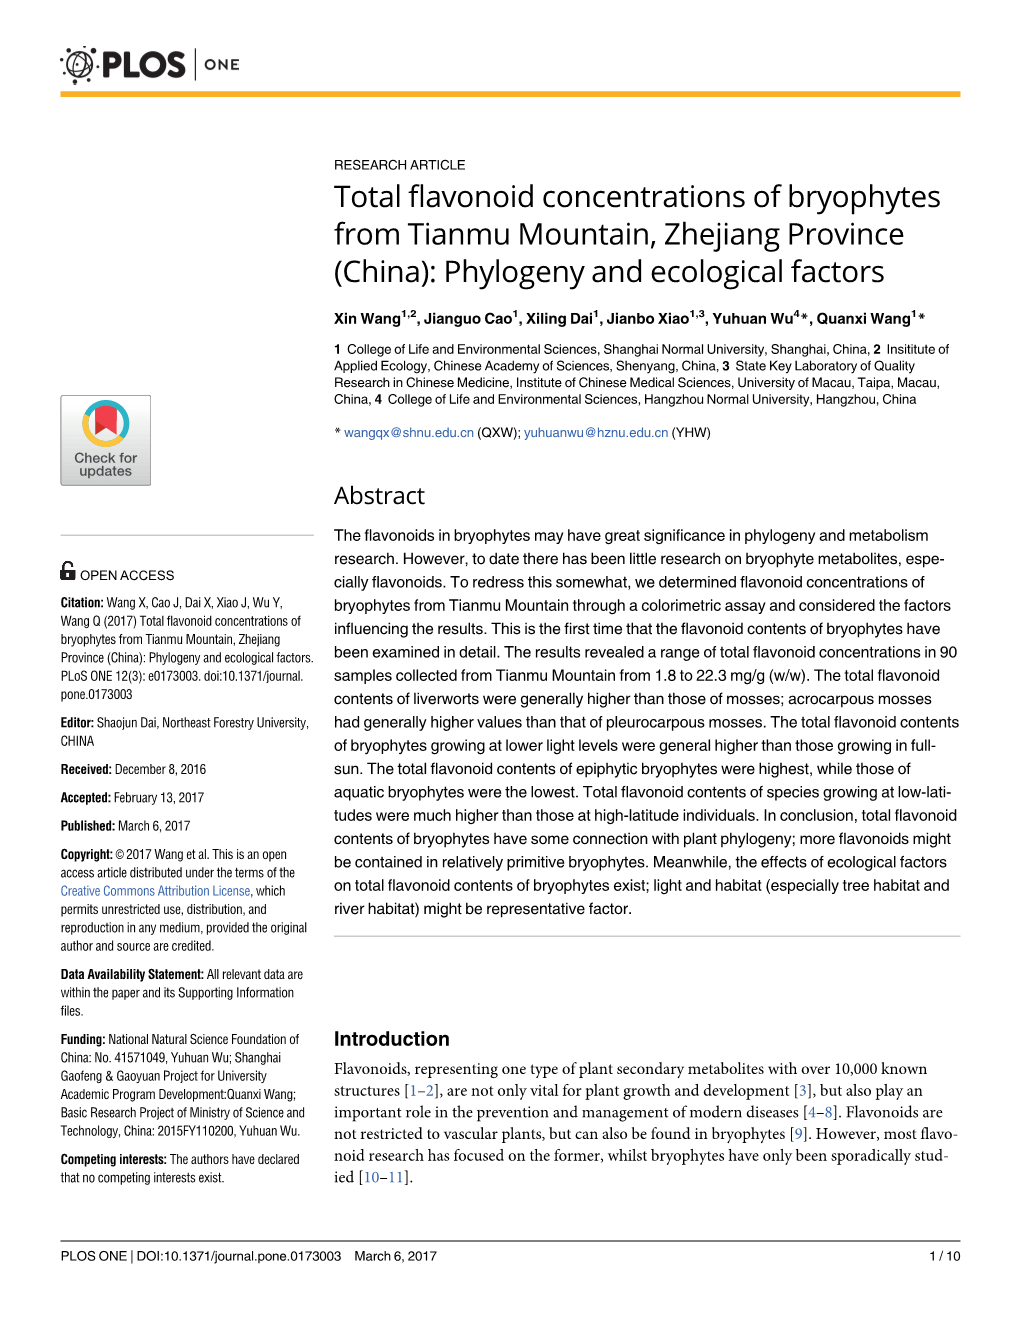 Total Flavonoid Concentrations of Bryophytes from Tianmu Mountain, Zhejiang Province (China): Phylogeny and Ecological Factors